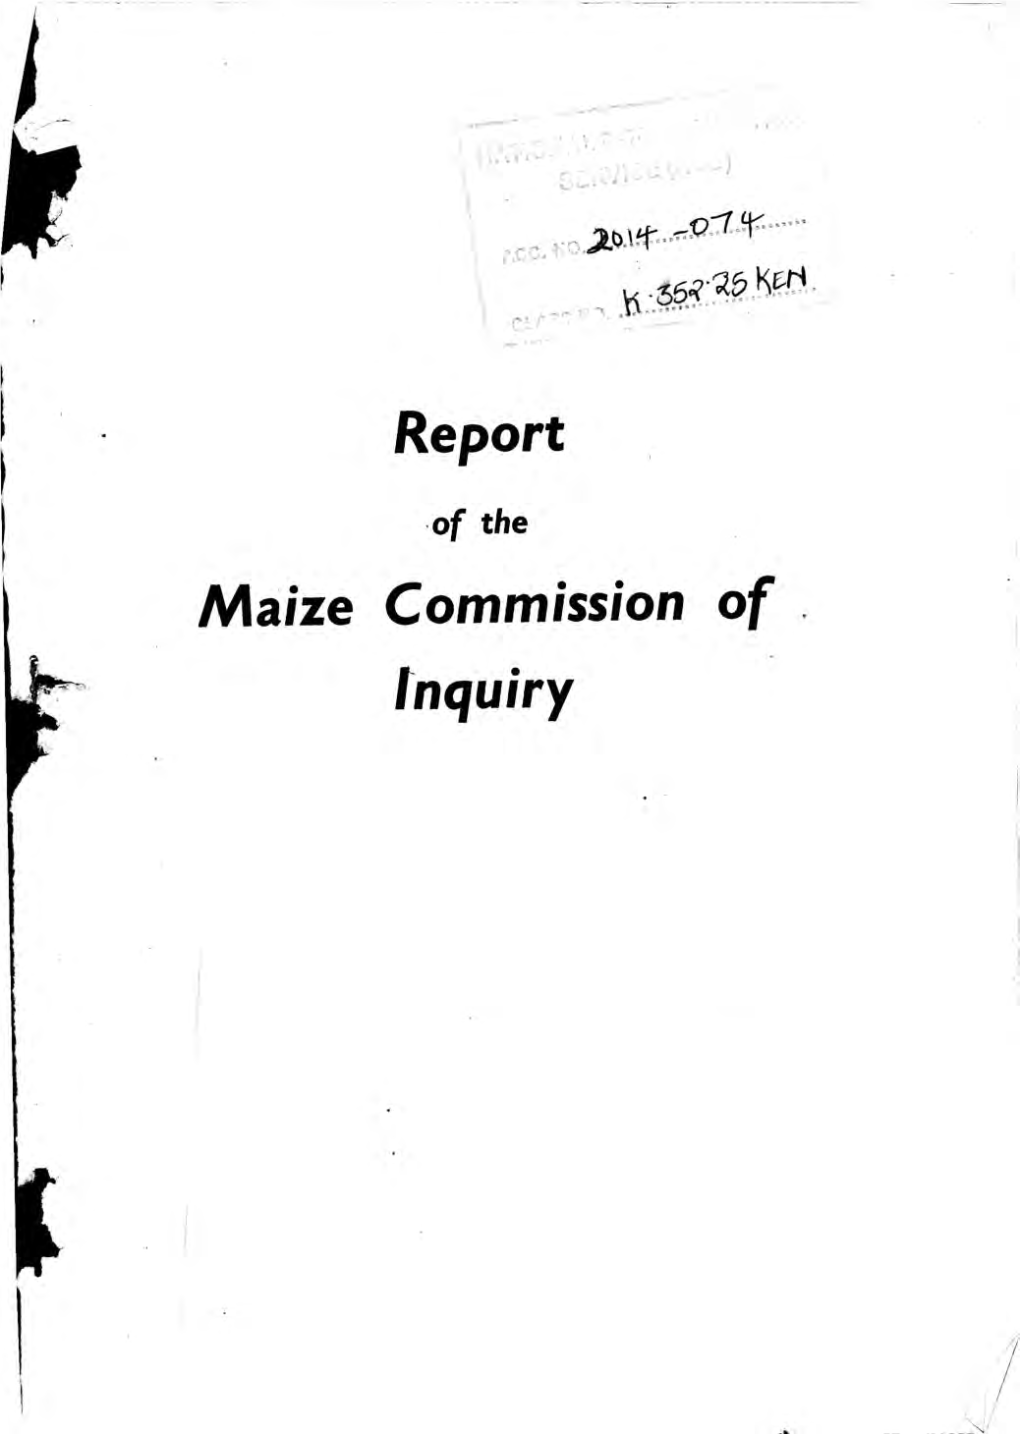 Report of the Maize Commission of Inquiry